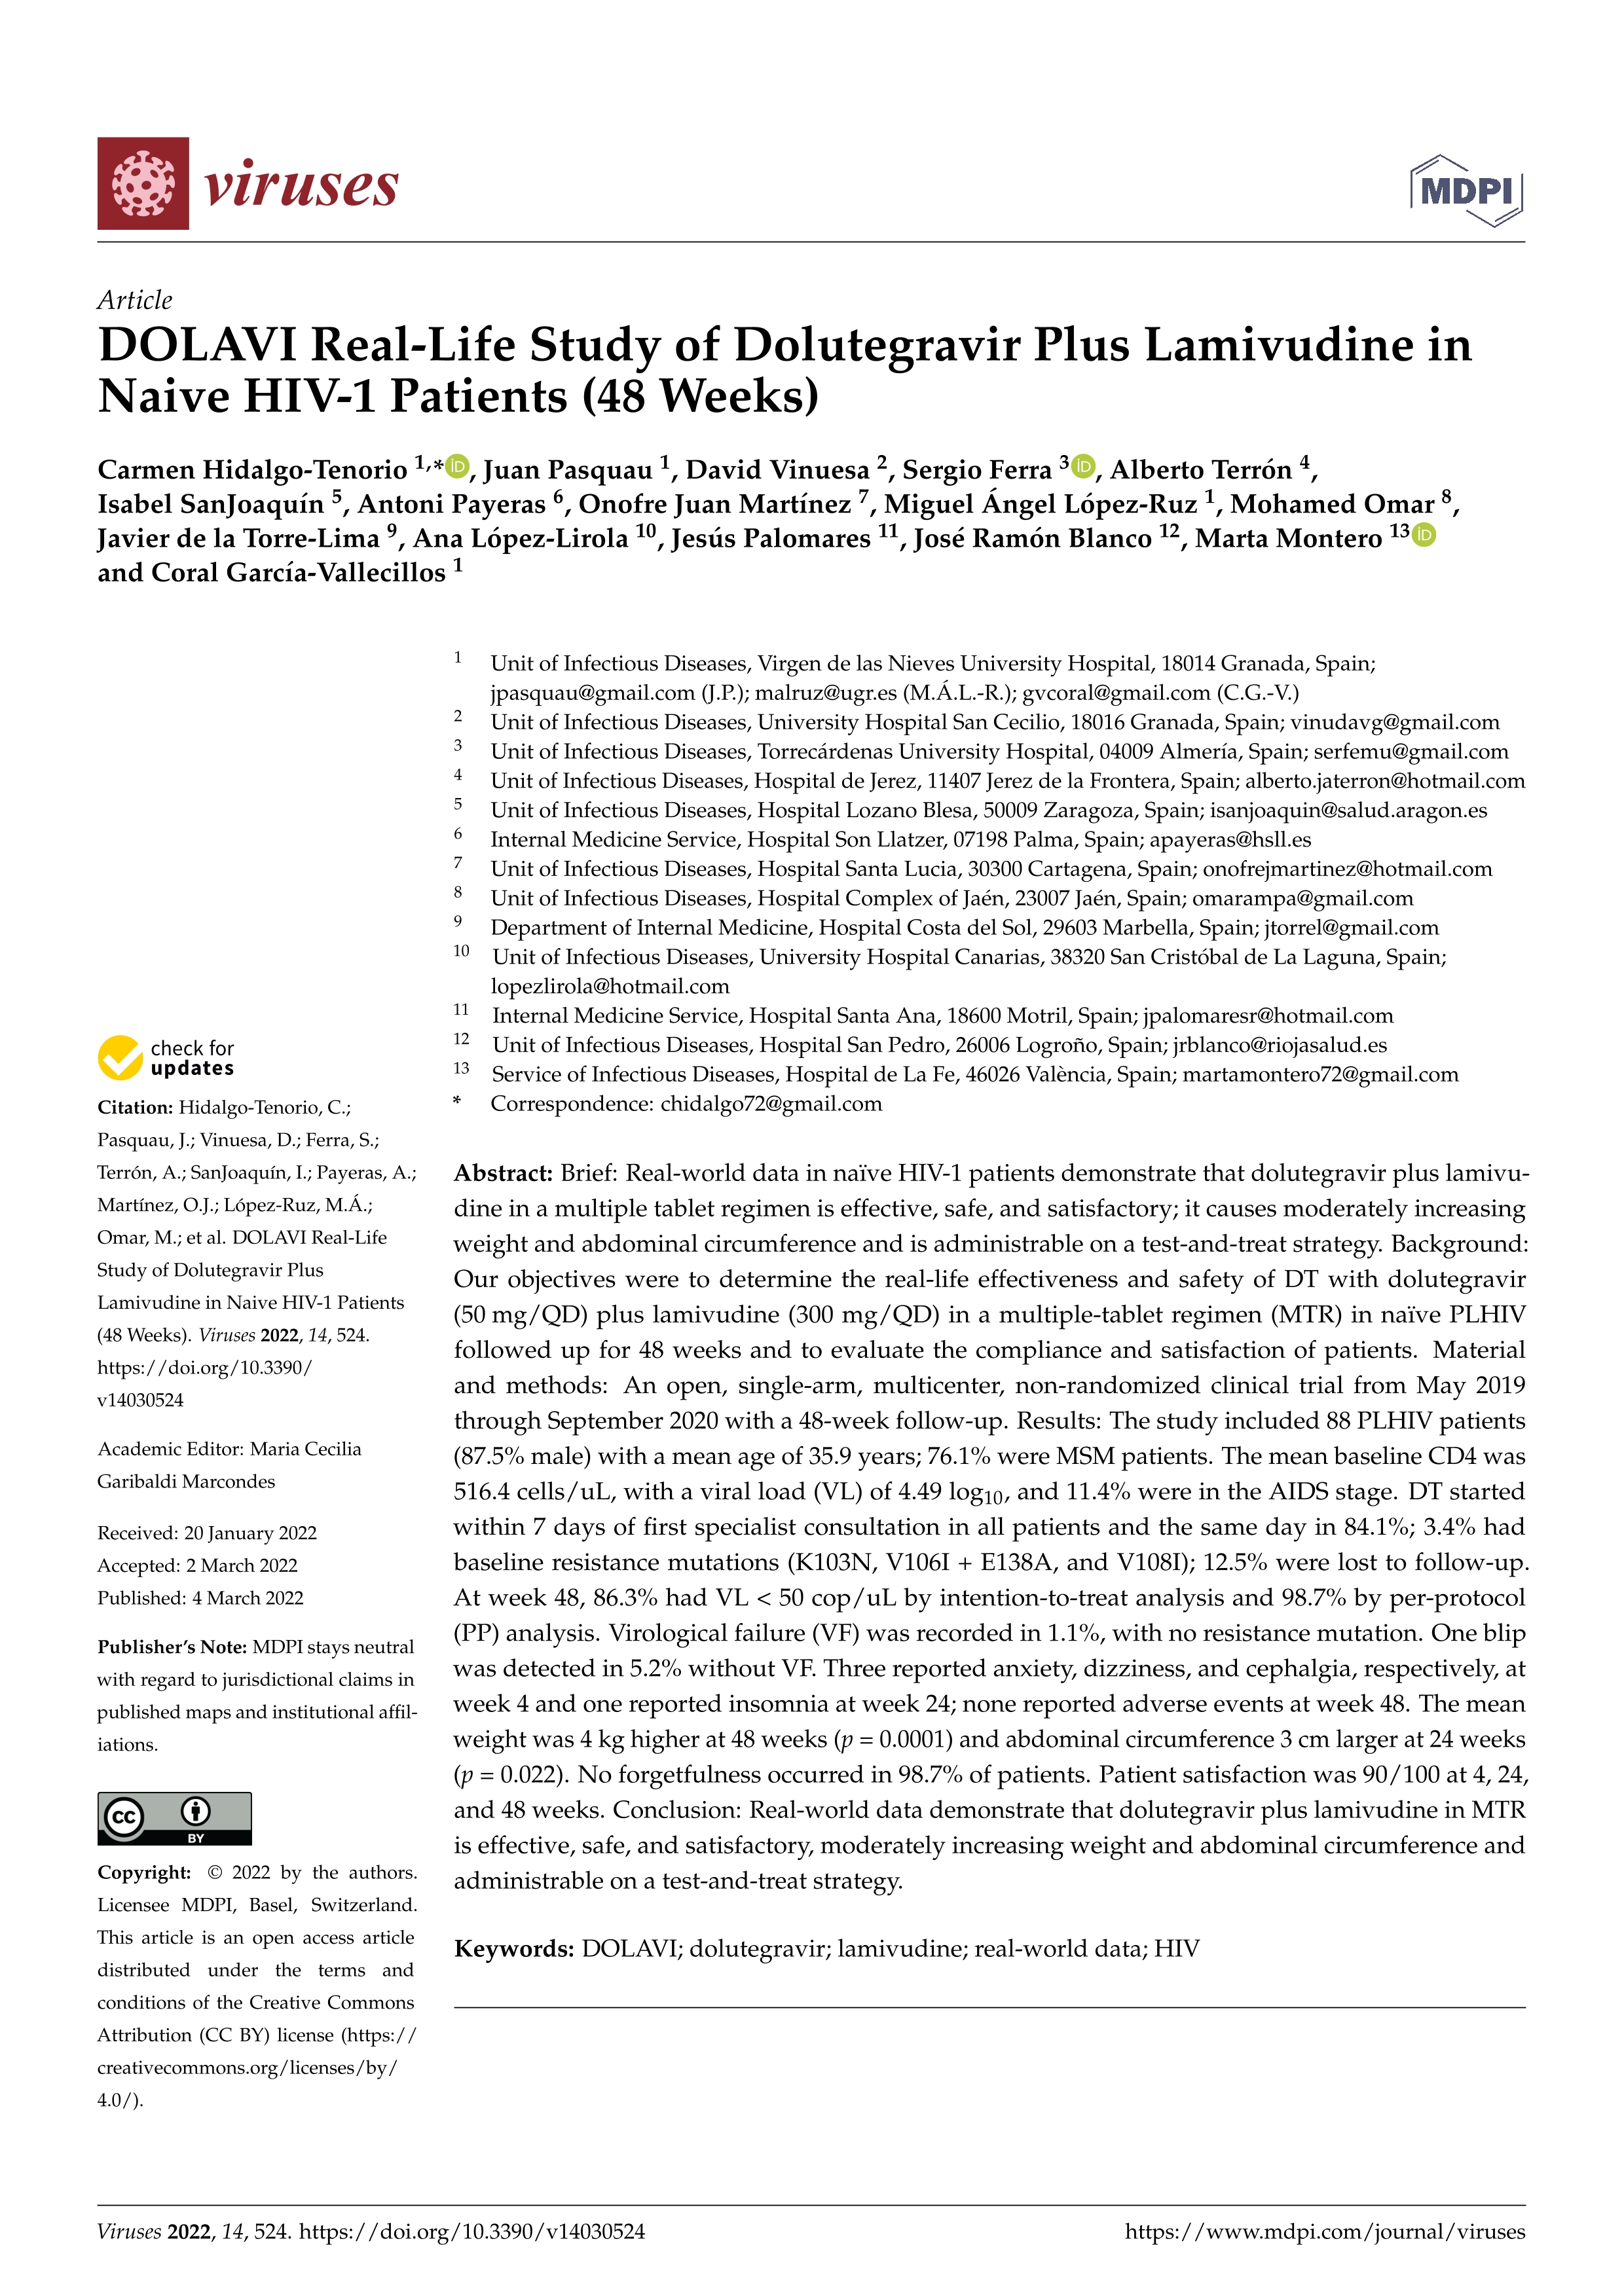 DOLAVI Real-Life Study of Dolutegravir Plus Lamivudine in Naive HIV-1 Patients (48 Weeks)